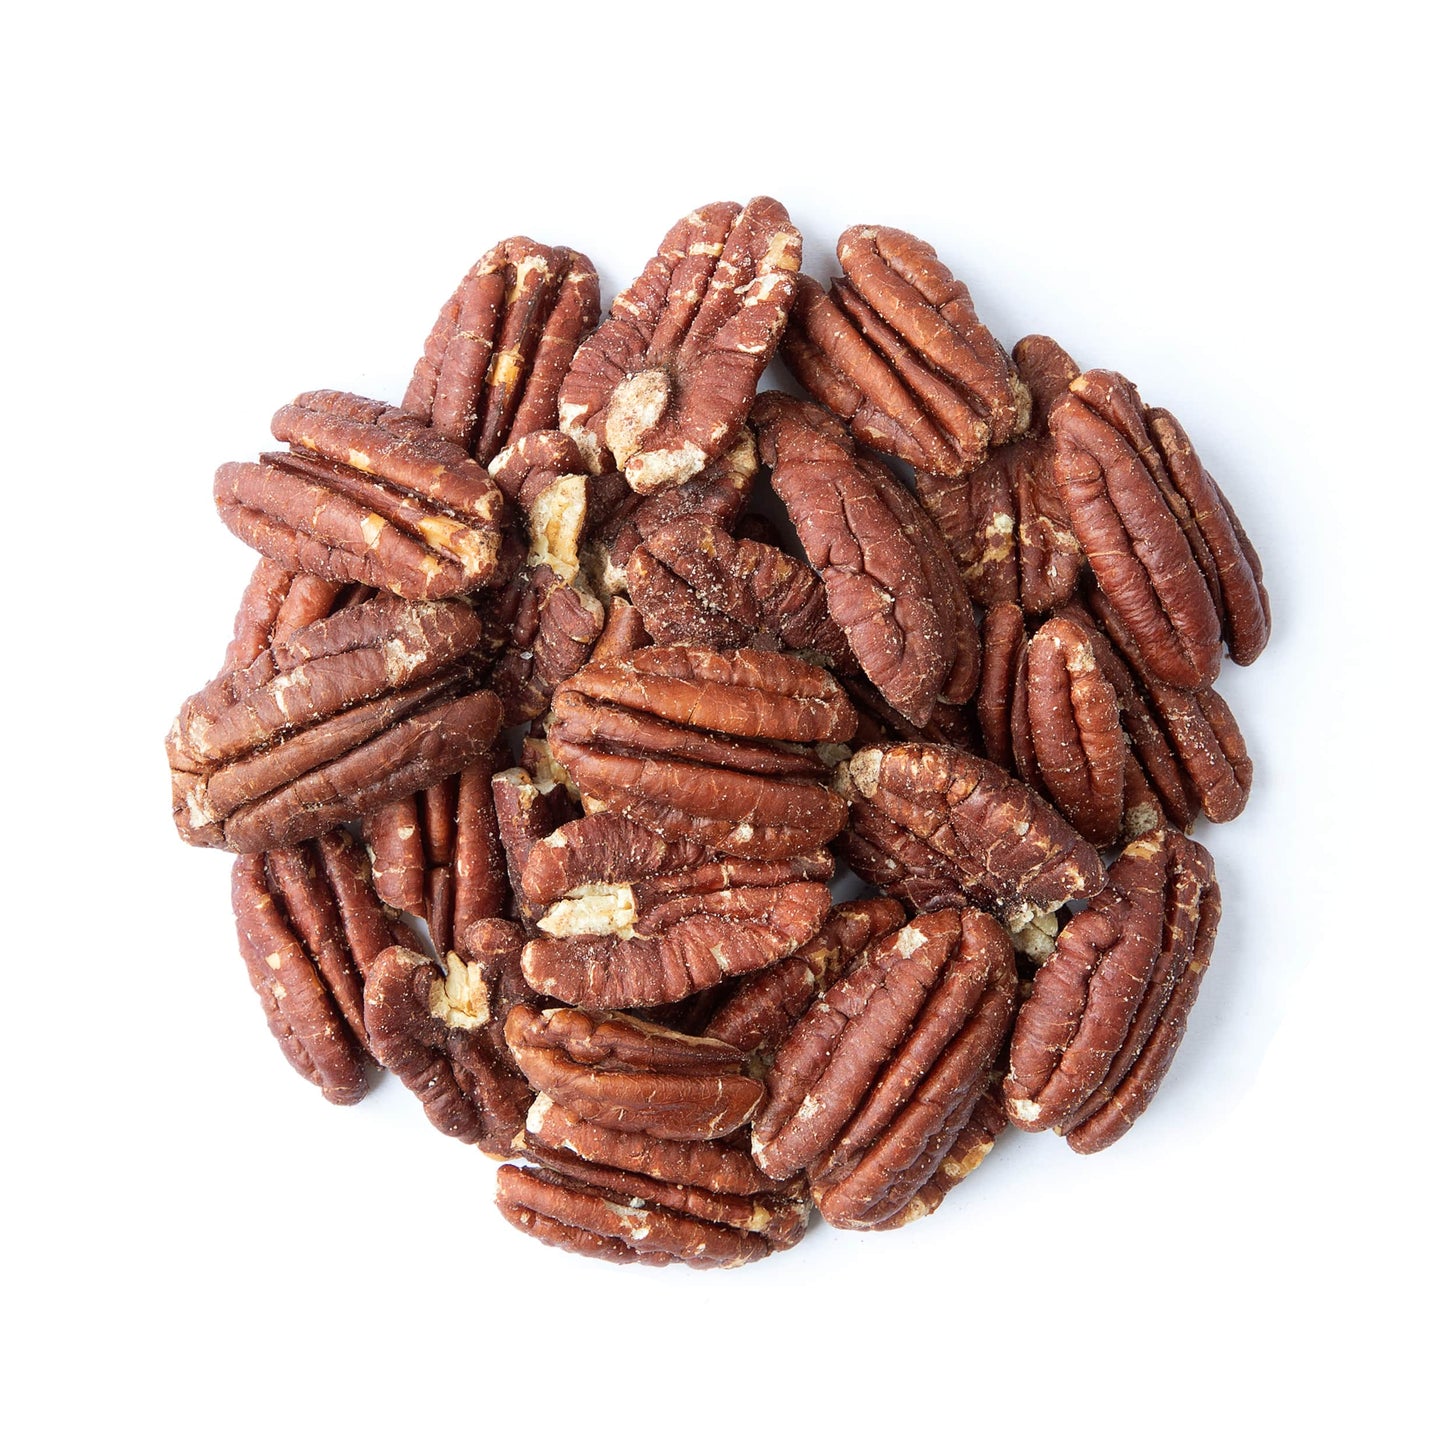 Organic Dry Roasted Pecan Halves with Himalayan Salt – Non-GMO, Oven Roasted Lightly Salted Pecan Nuts, No Oil Added, Vegan Snack, Kosher, Keto, Bulk. Good Source of Protein and Fiber